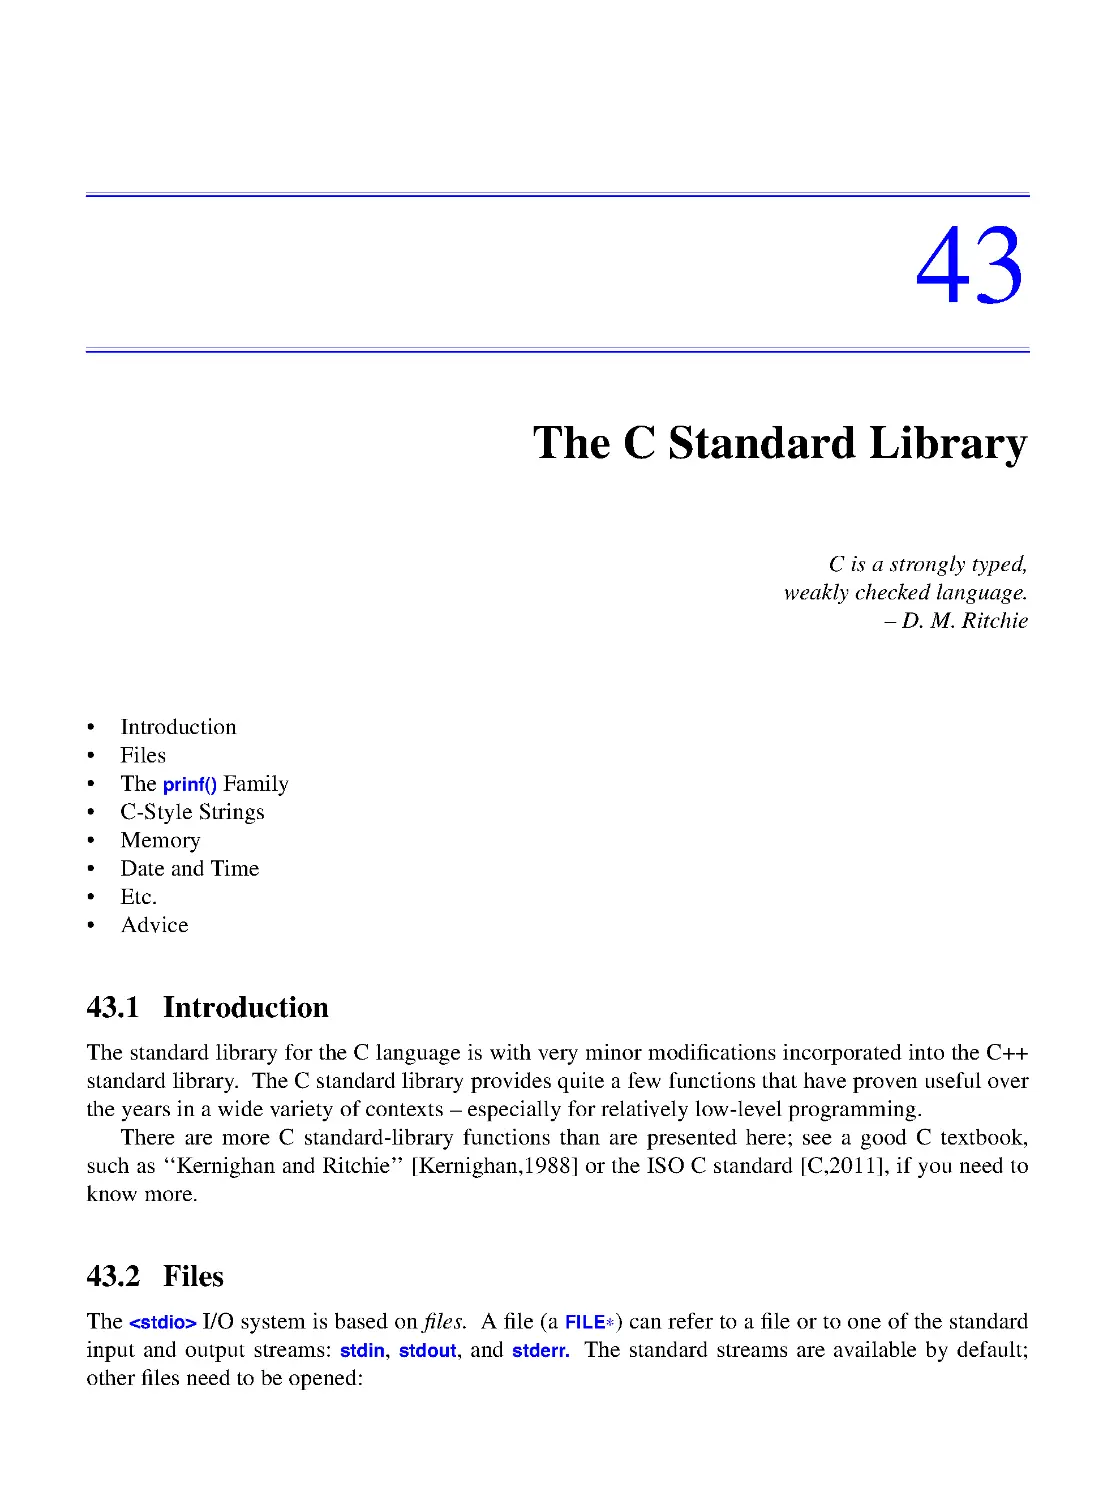 43. The C Standard Library